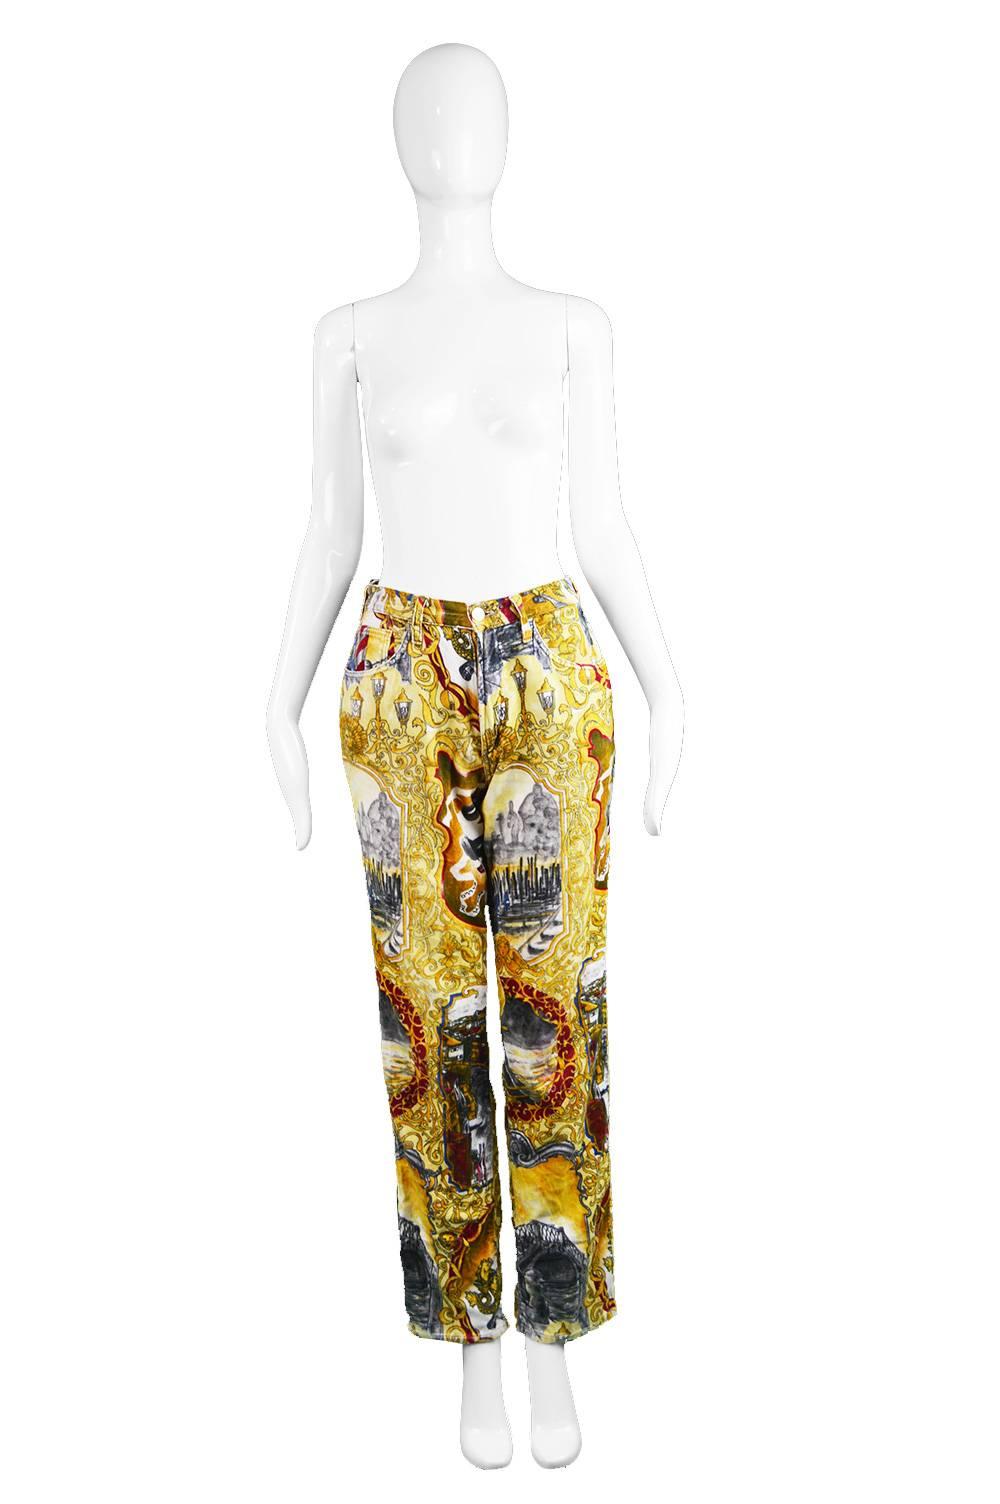 A stunning pair of cotton velvet trousers from the 90s by cult label Iceberg Jeans with a straight leg and incredible bright renaissance/ baroque print throughout. Looks great as part of both a women's or men's wardrobe.

Estimated Size: UK 10/ US